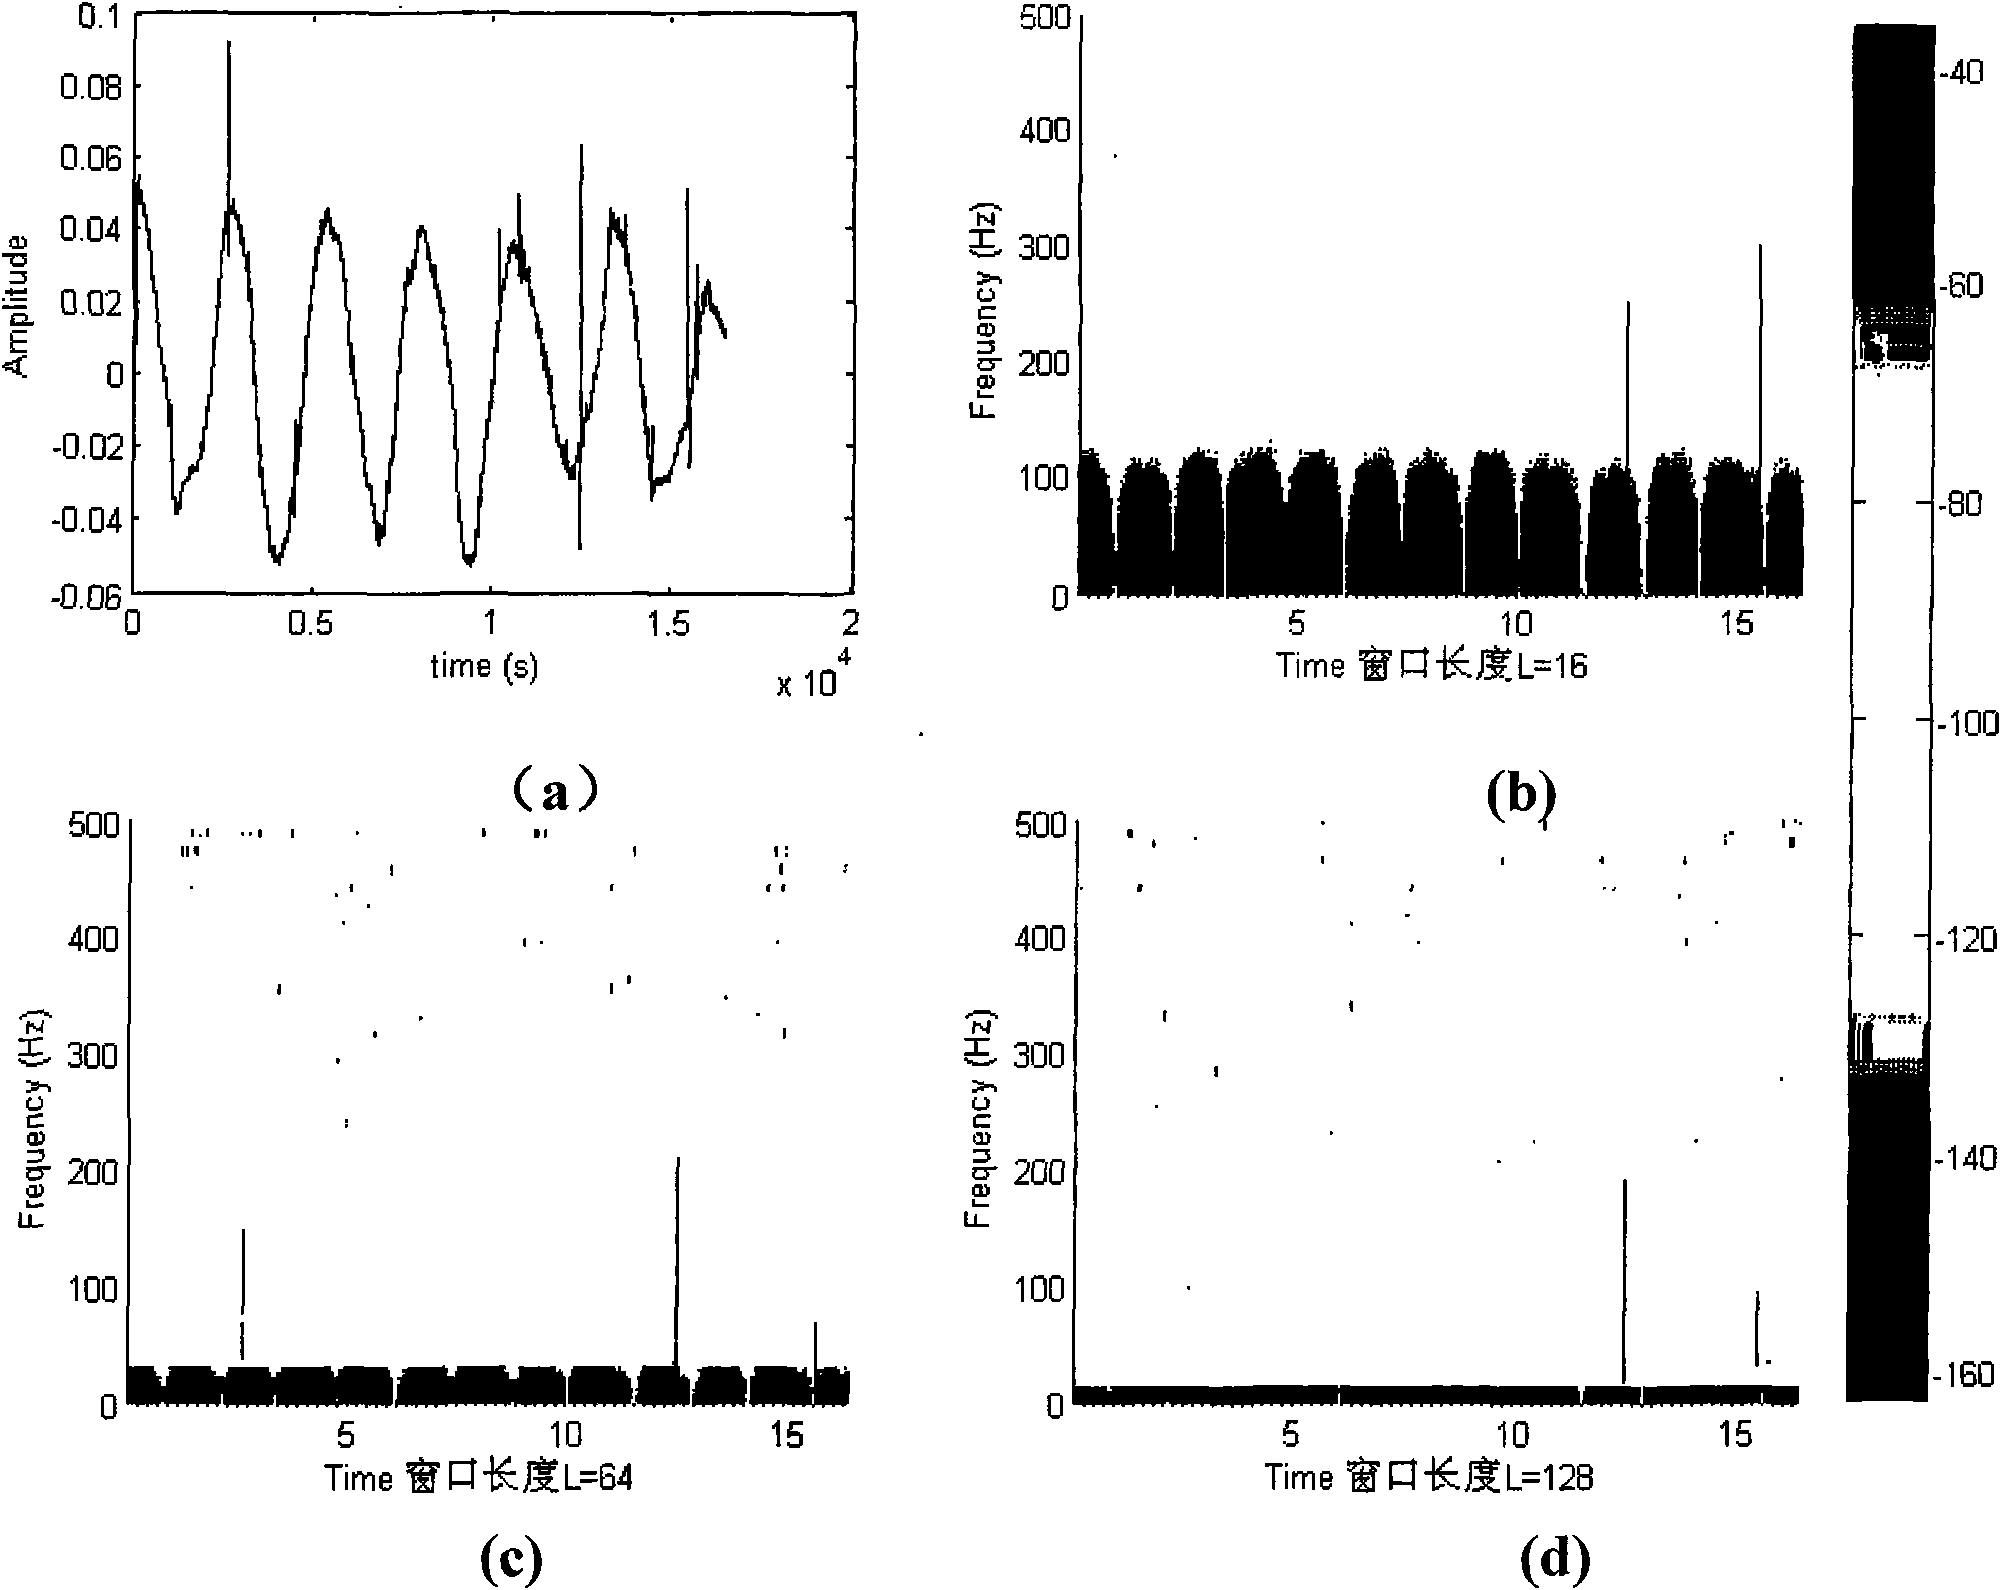 Historical voice frequency noise detection and elimination method